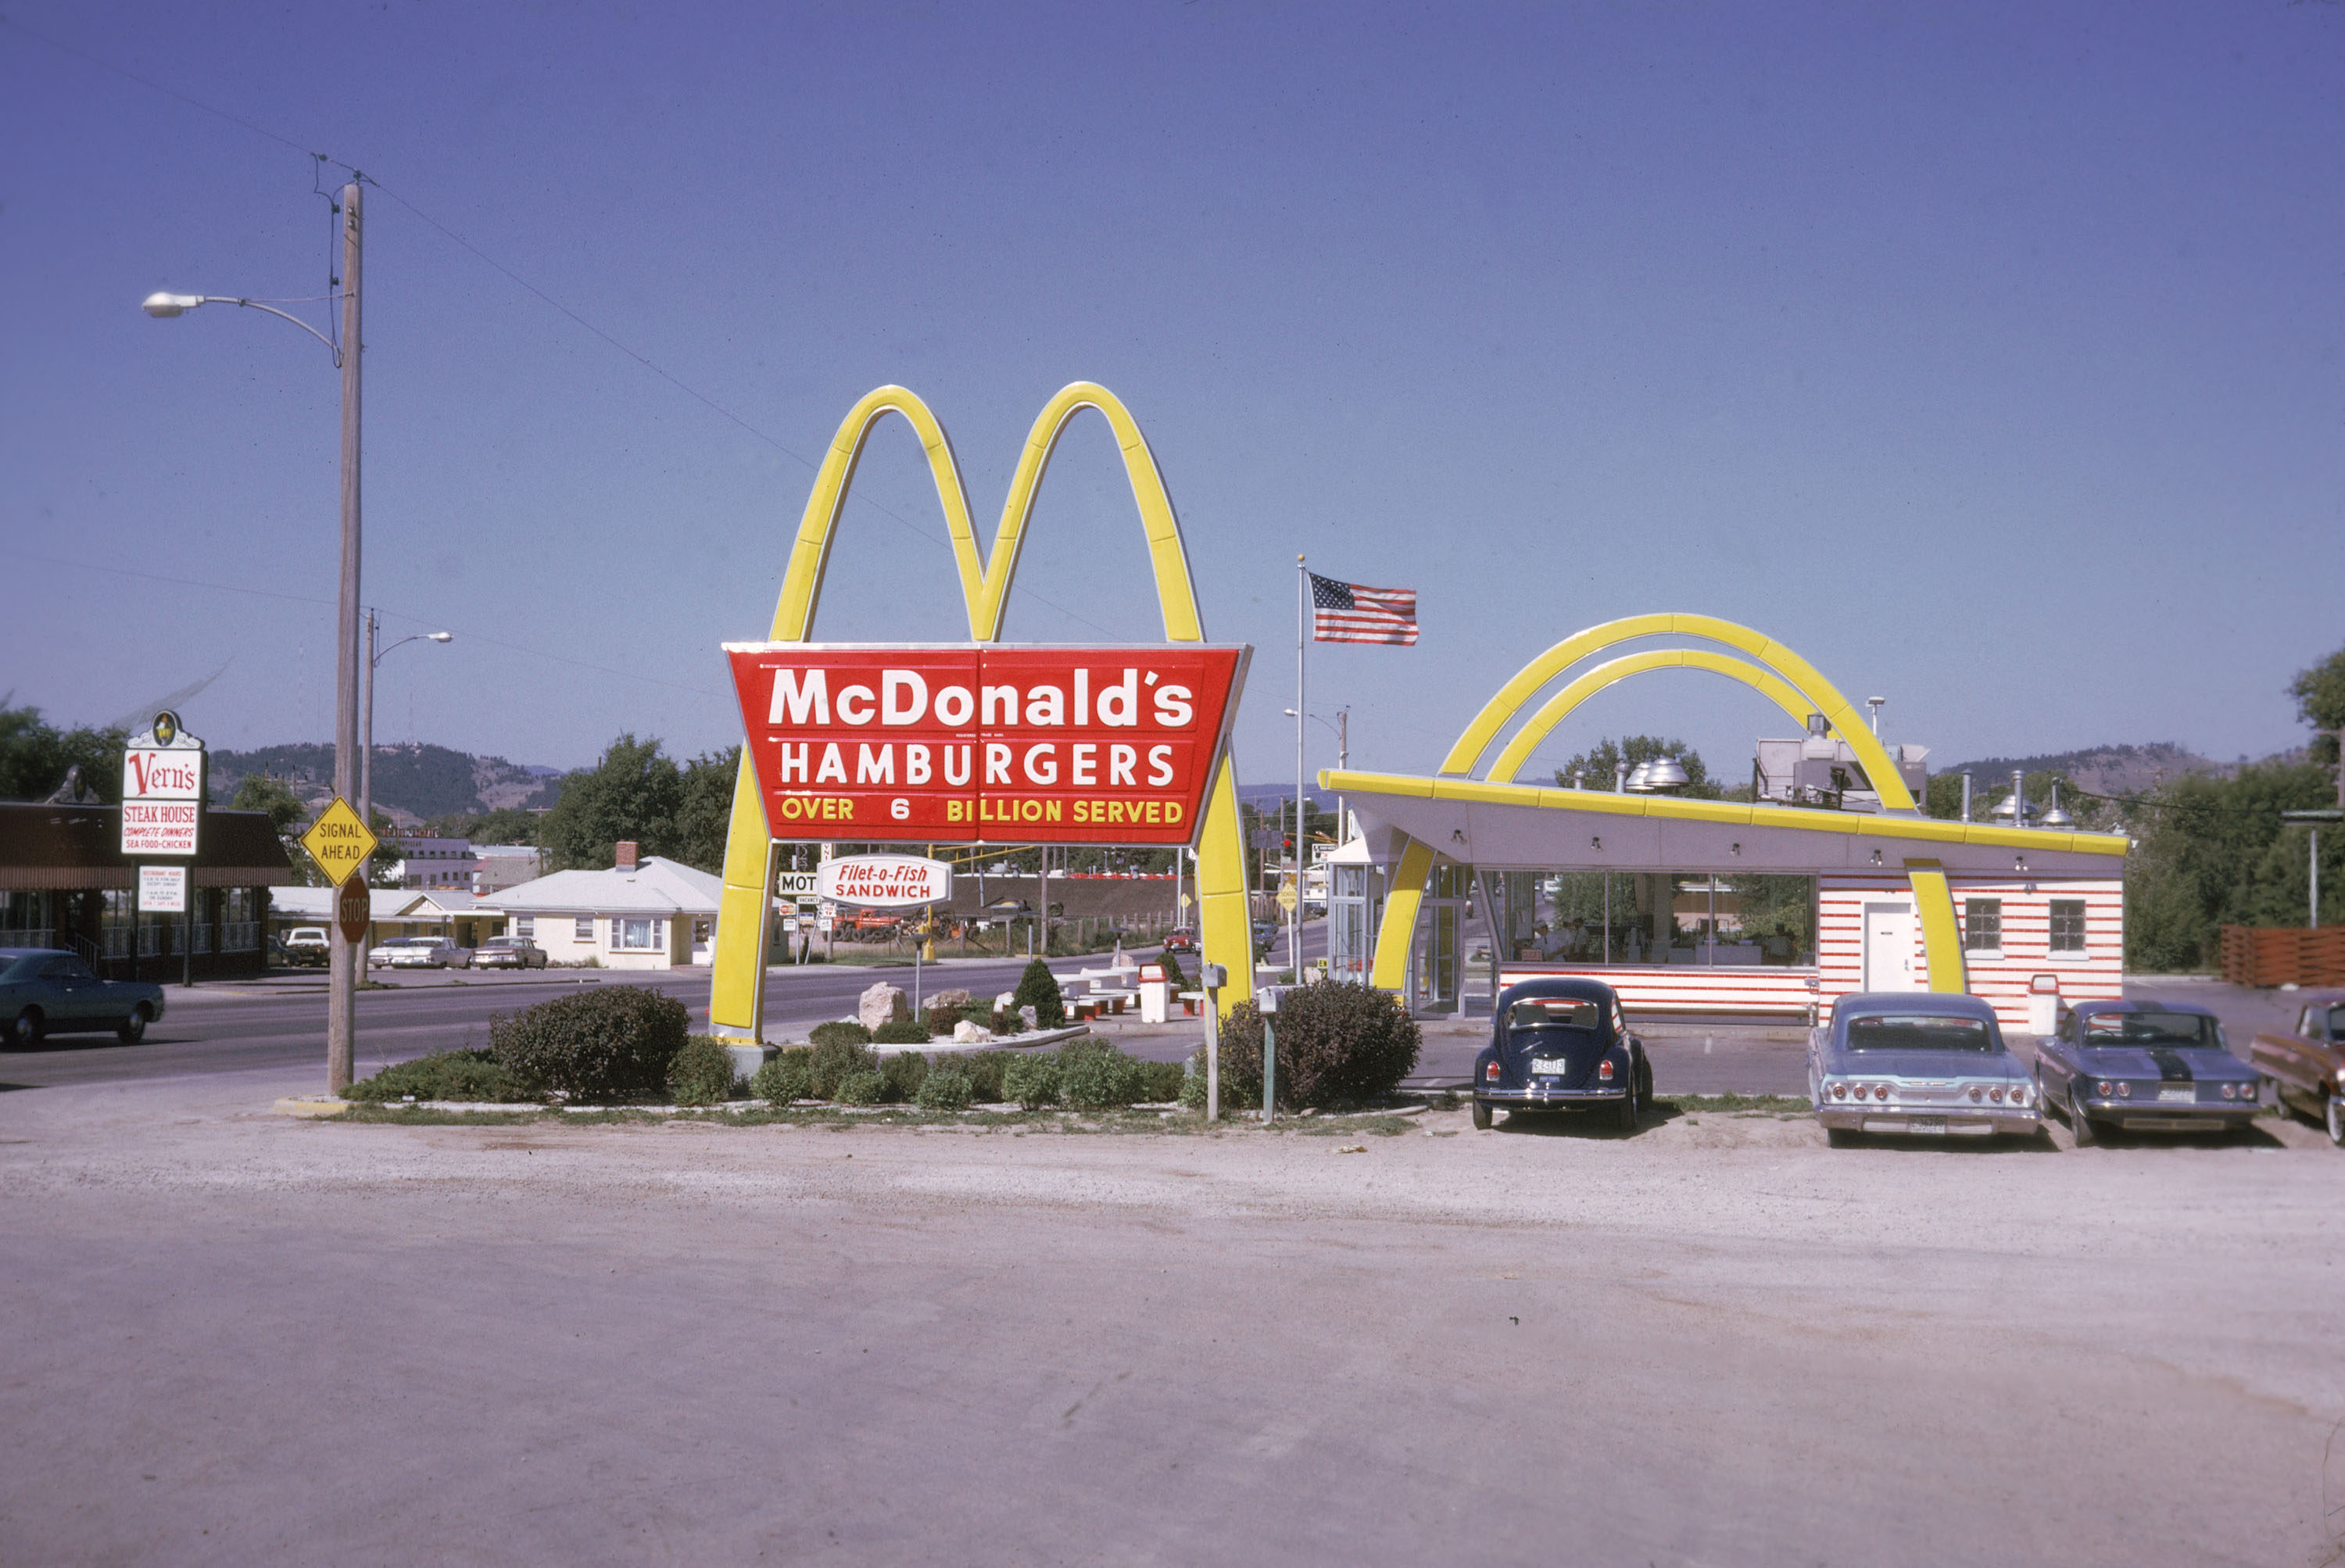 The Founder and the Complicated True Story Behind the Founding of McDonald's